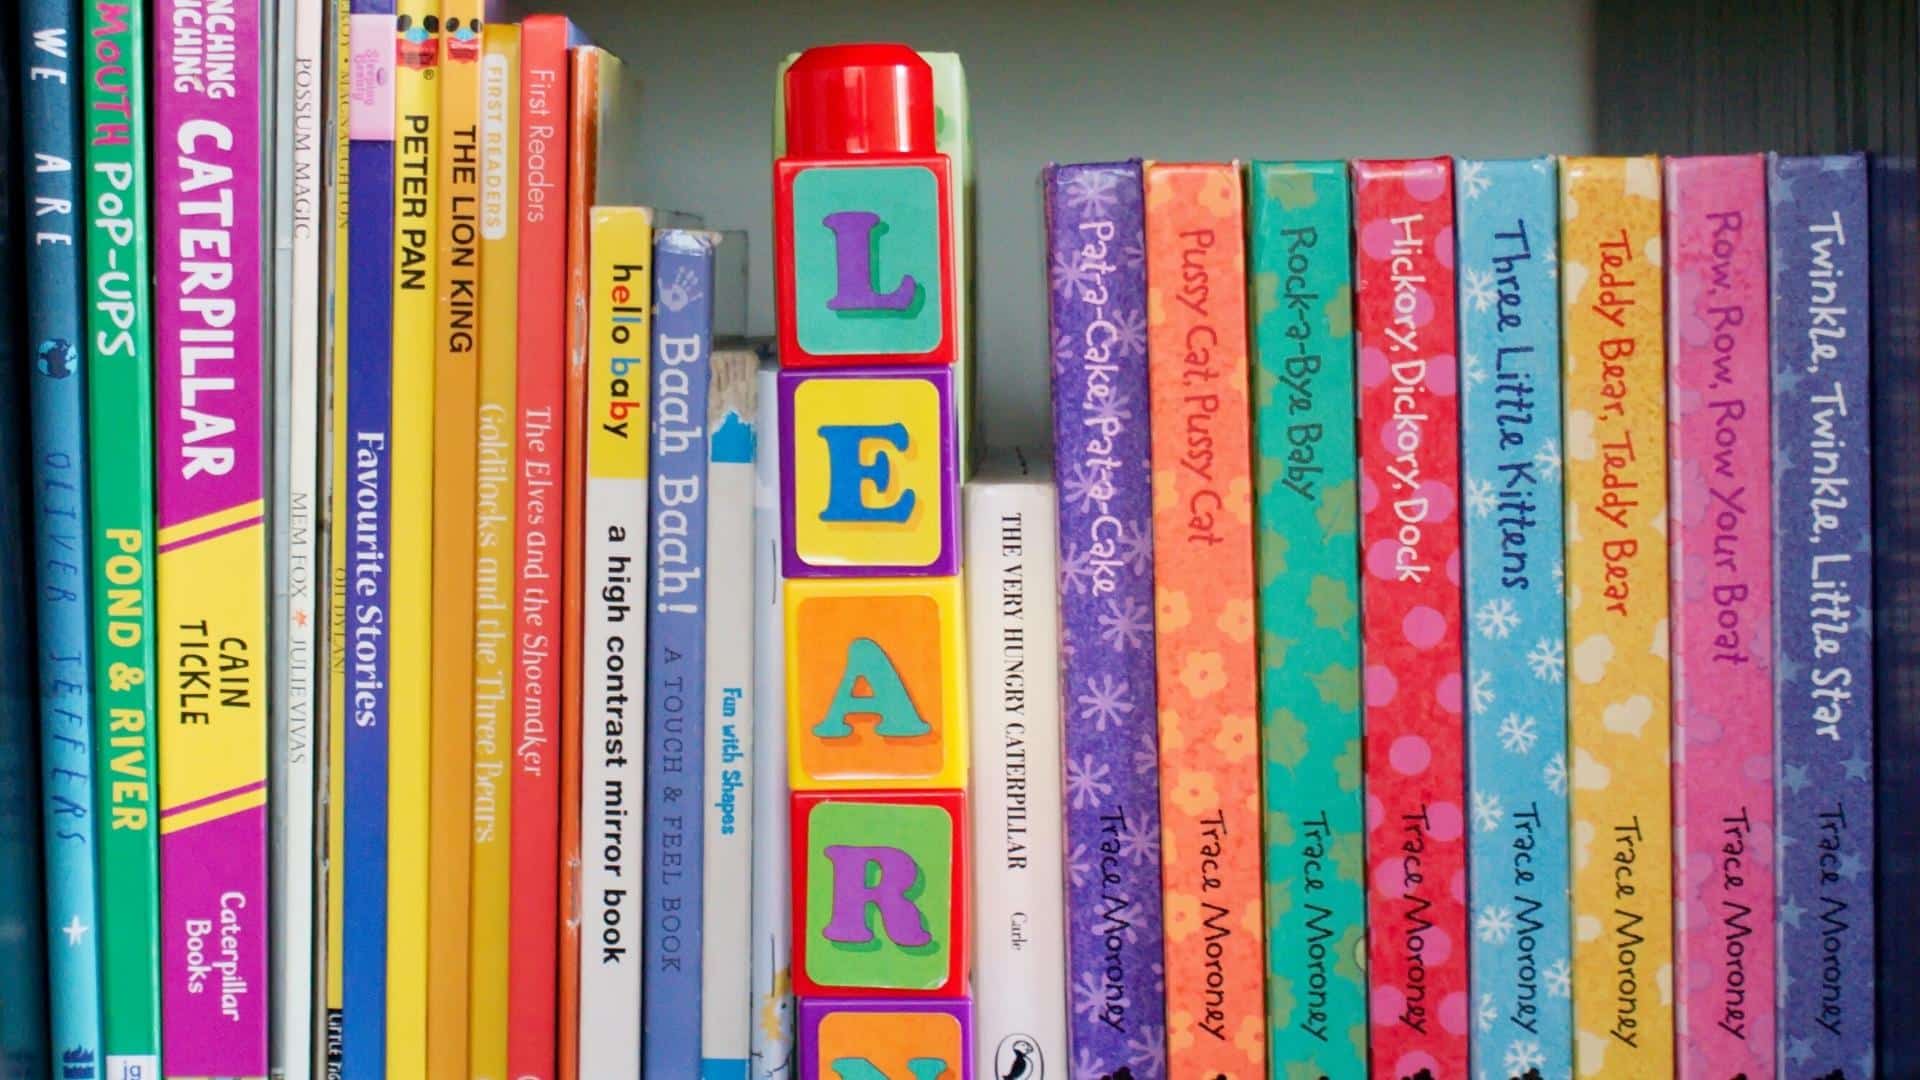 The Best Books For 5 Year Olds Every Little Bookworm Needs!